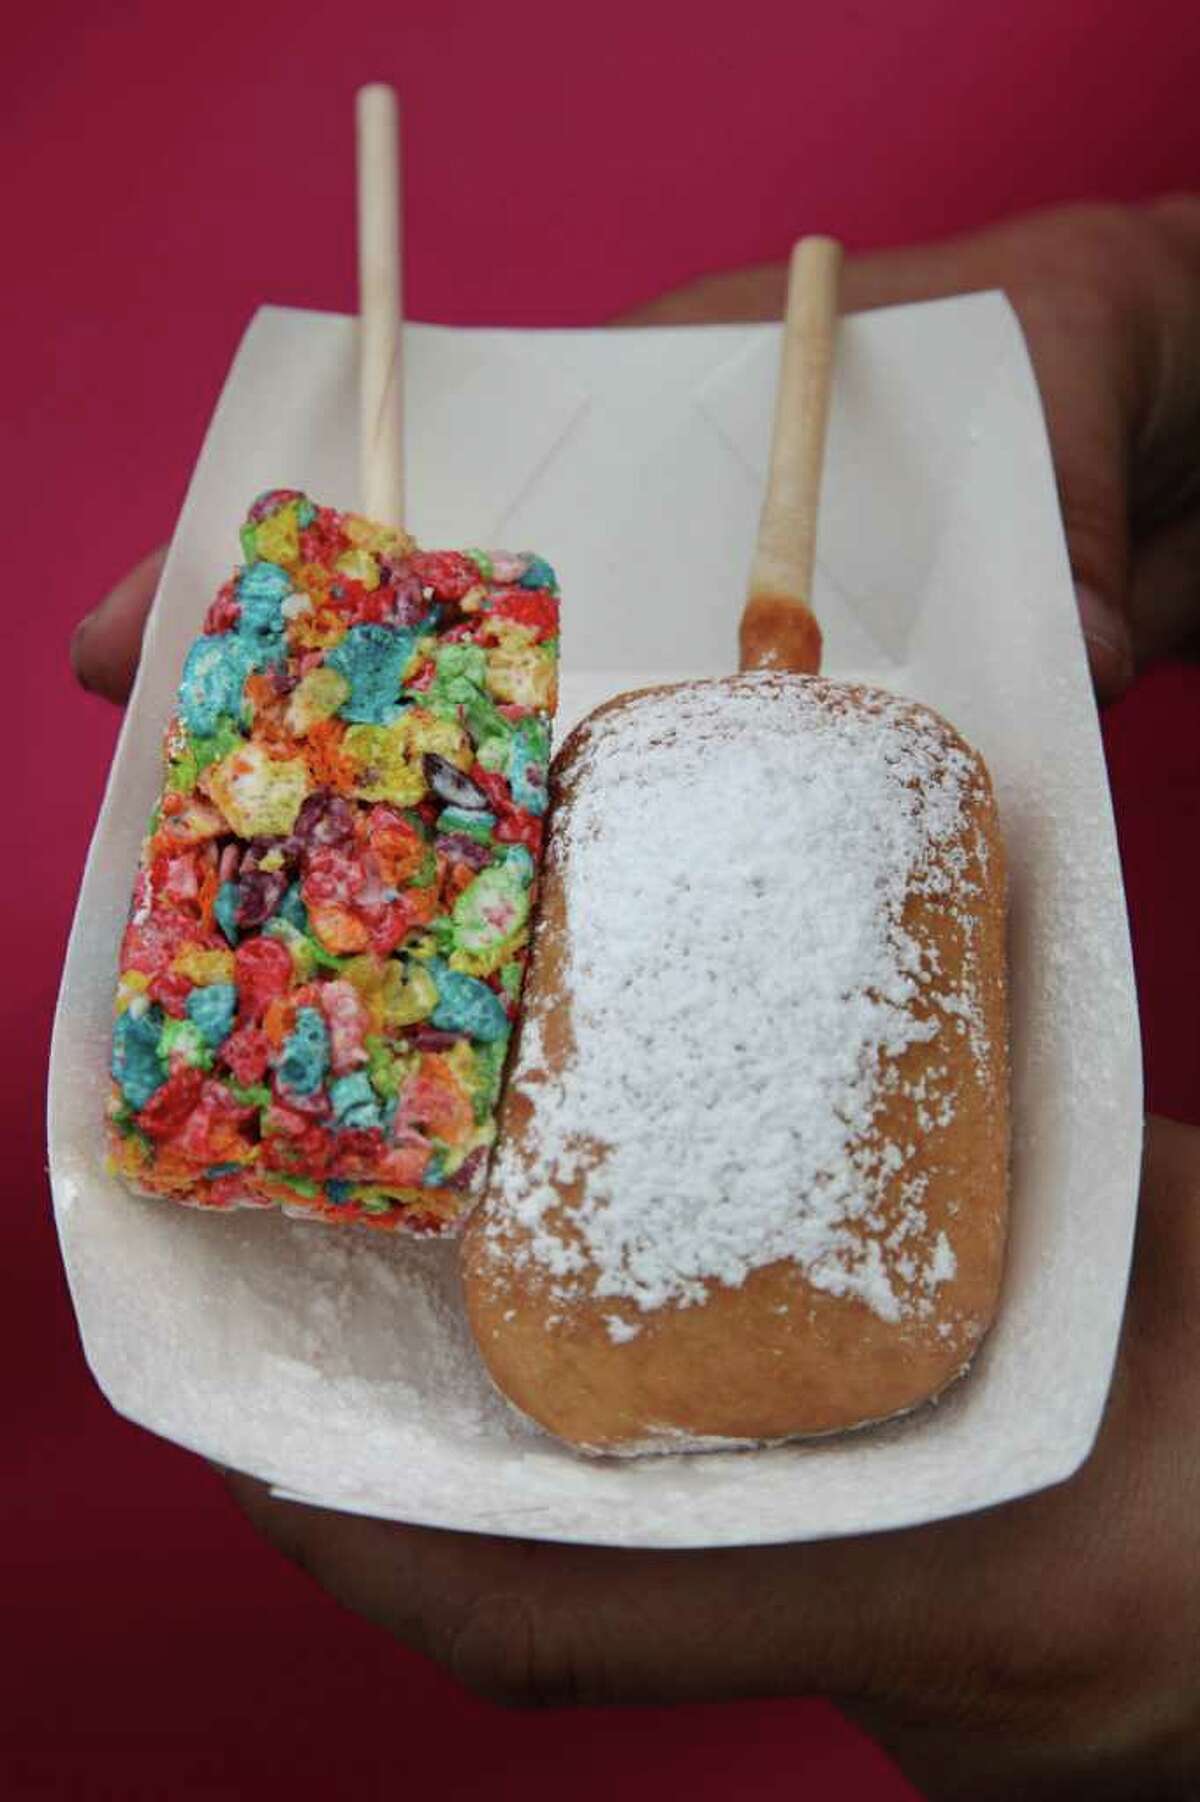 A Fruity Pebbles bar, left, is dipped in batter and then deep-fried, right.